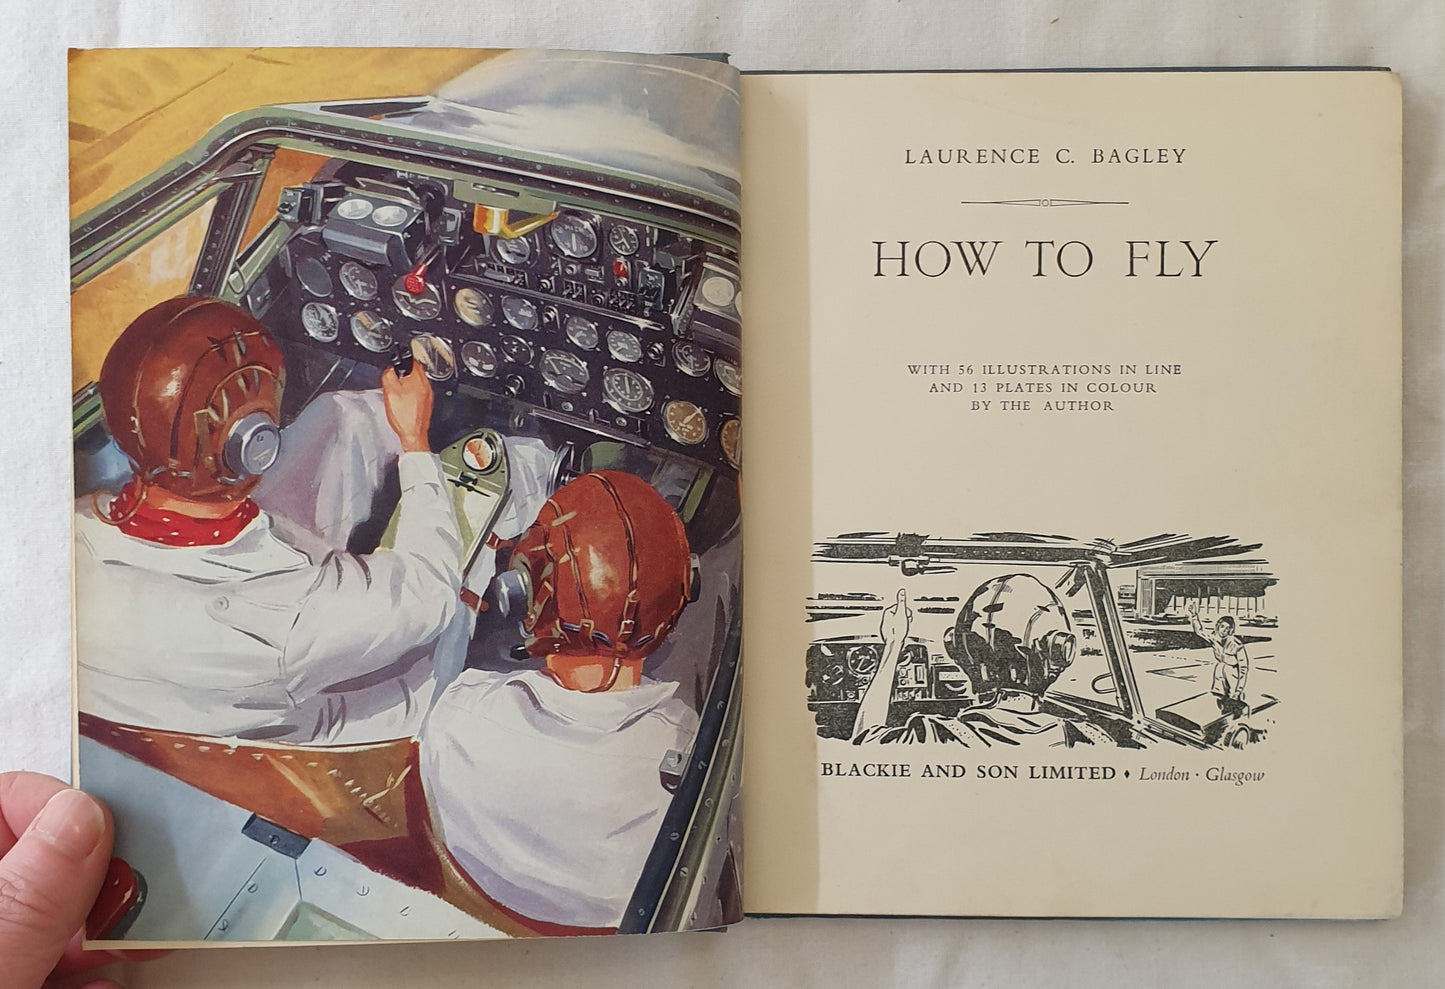 How to Fly by Laurence C. Bagley